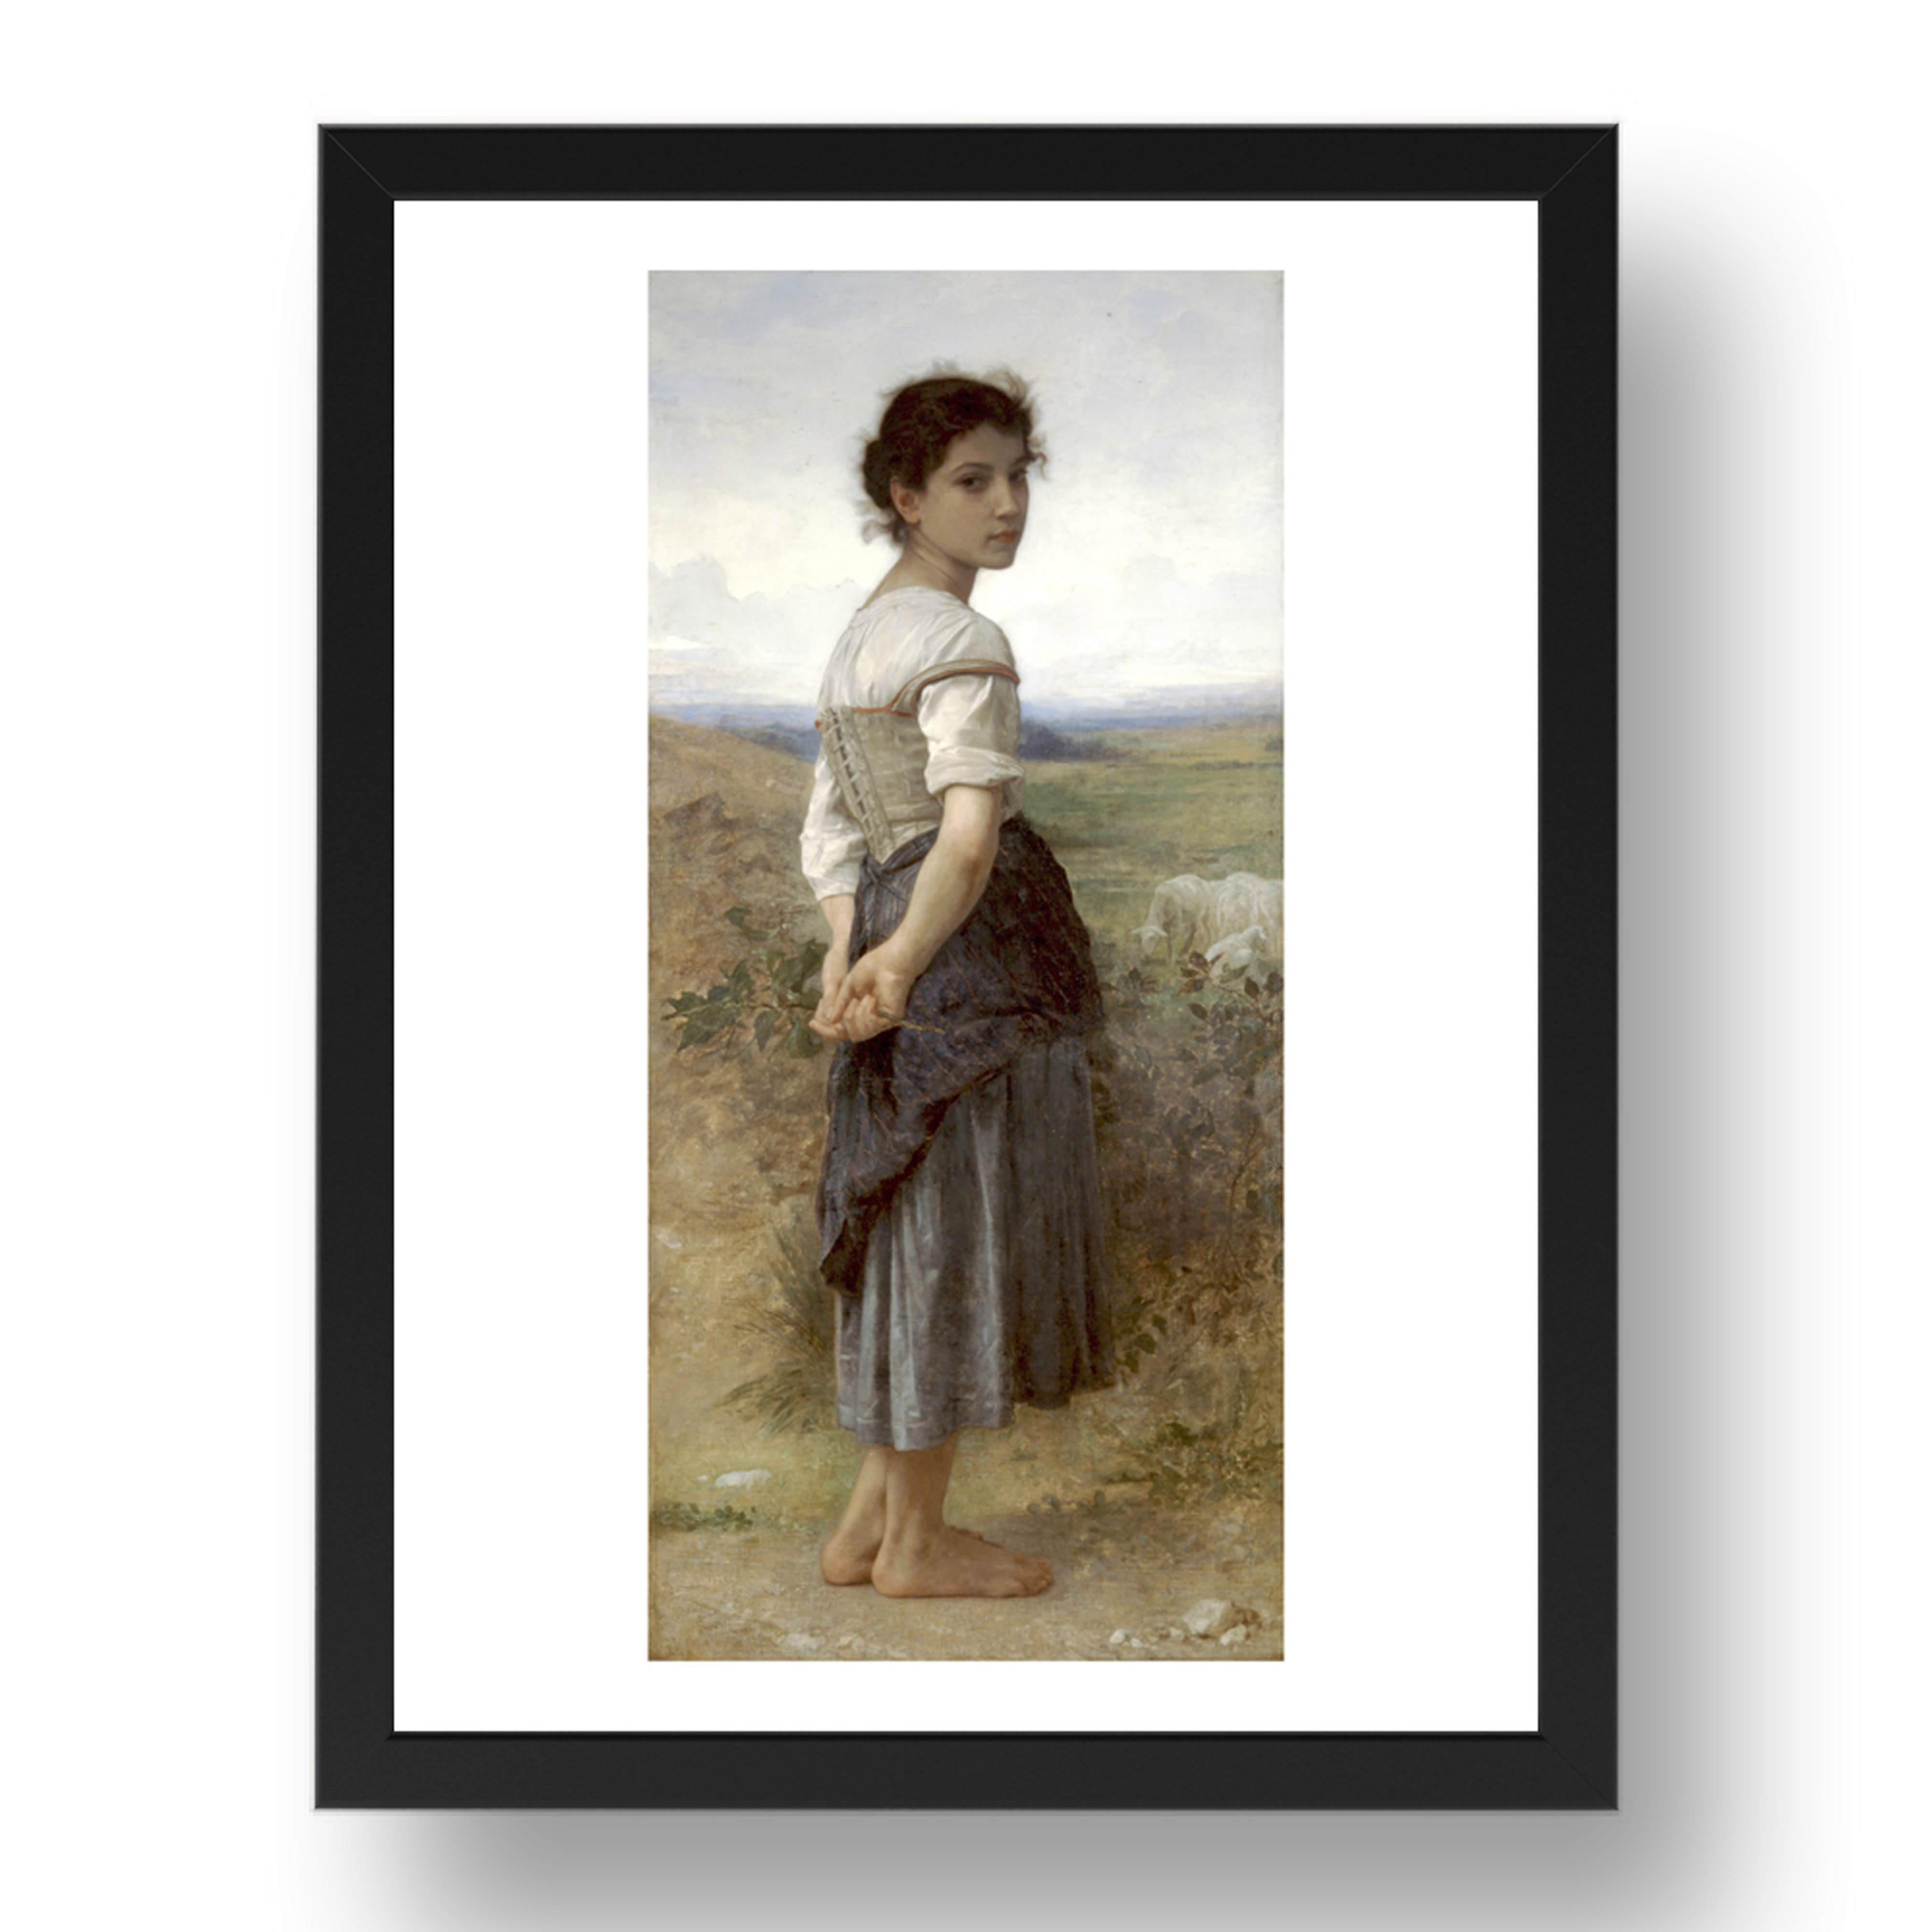 WilliamBouguereau - The Young Shepherdess [1885], A3 (17x13") Black Frame - Picture 1 of 1